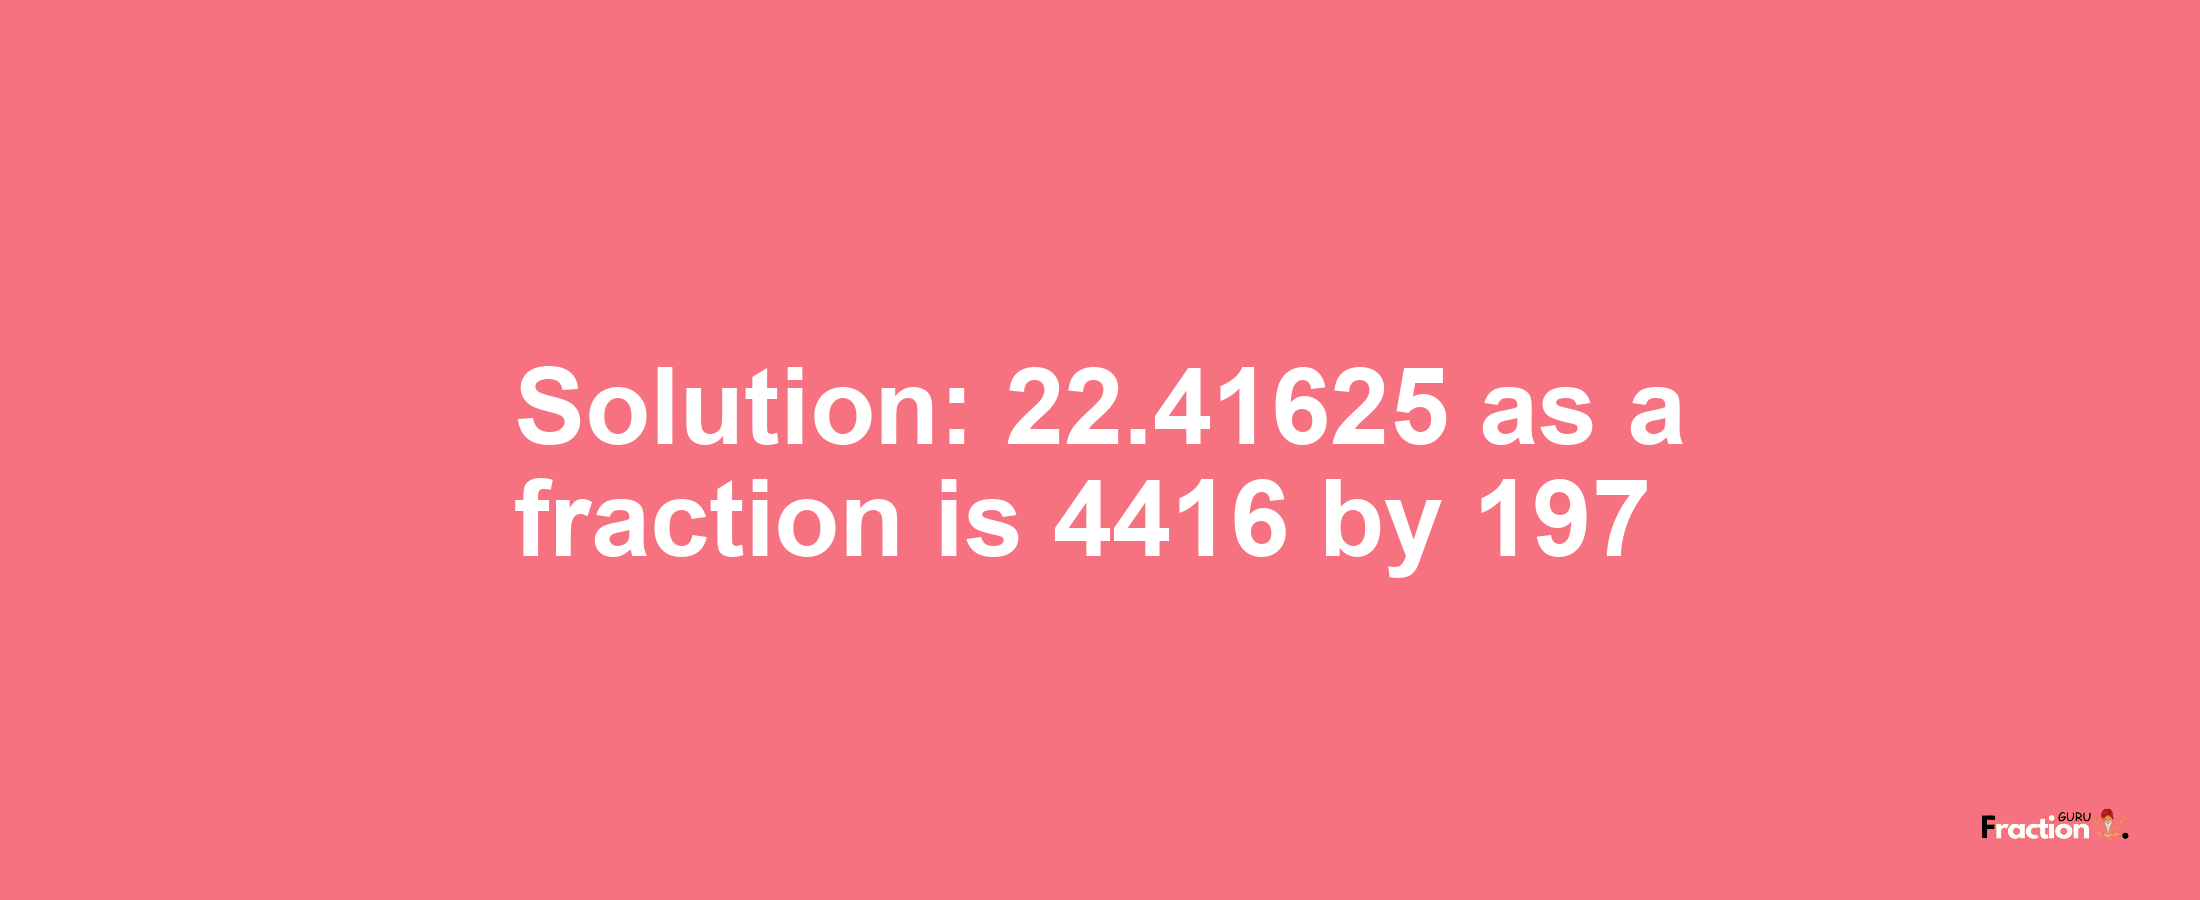 Solution:22.41625 as a fraction is 4416/197